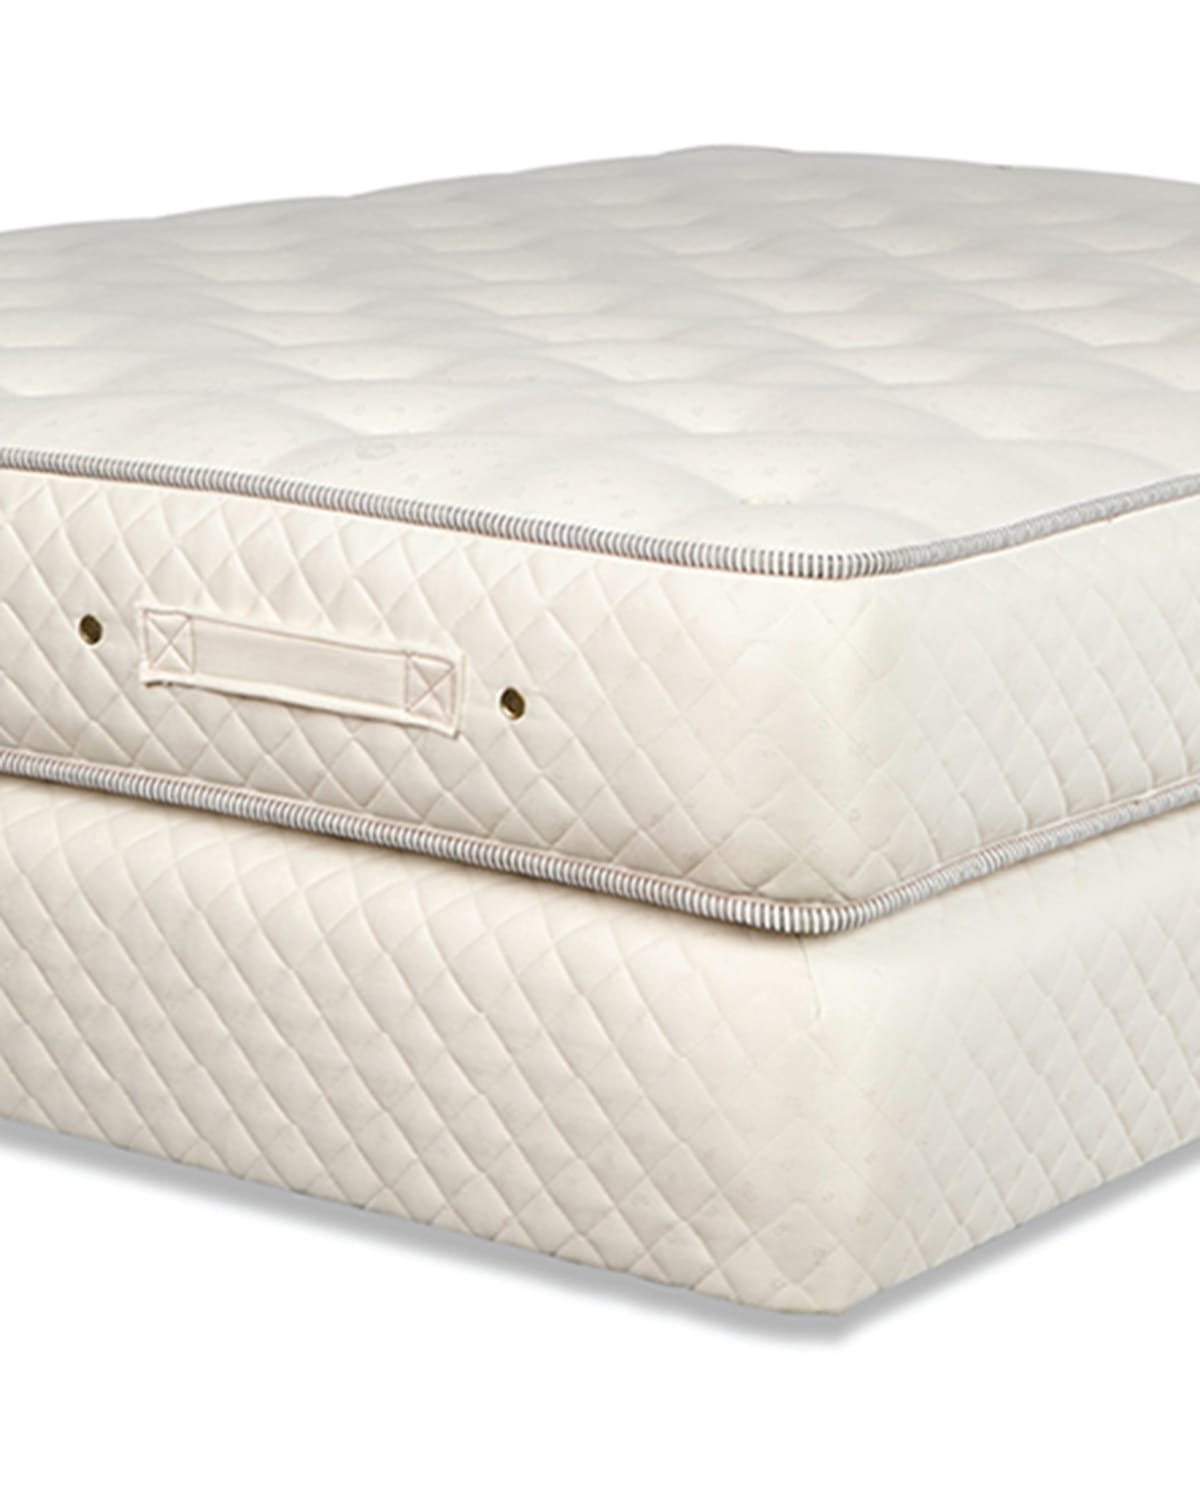 Royal-pedic Dream Spring Limited Firm Twin Mattress Set In White